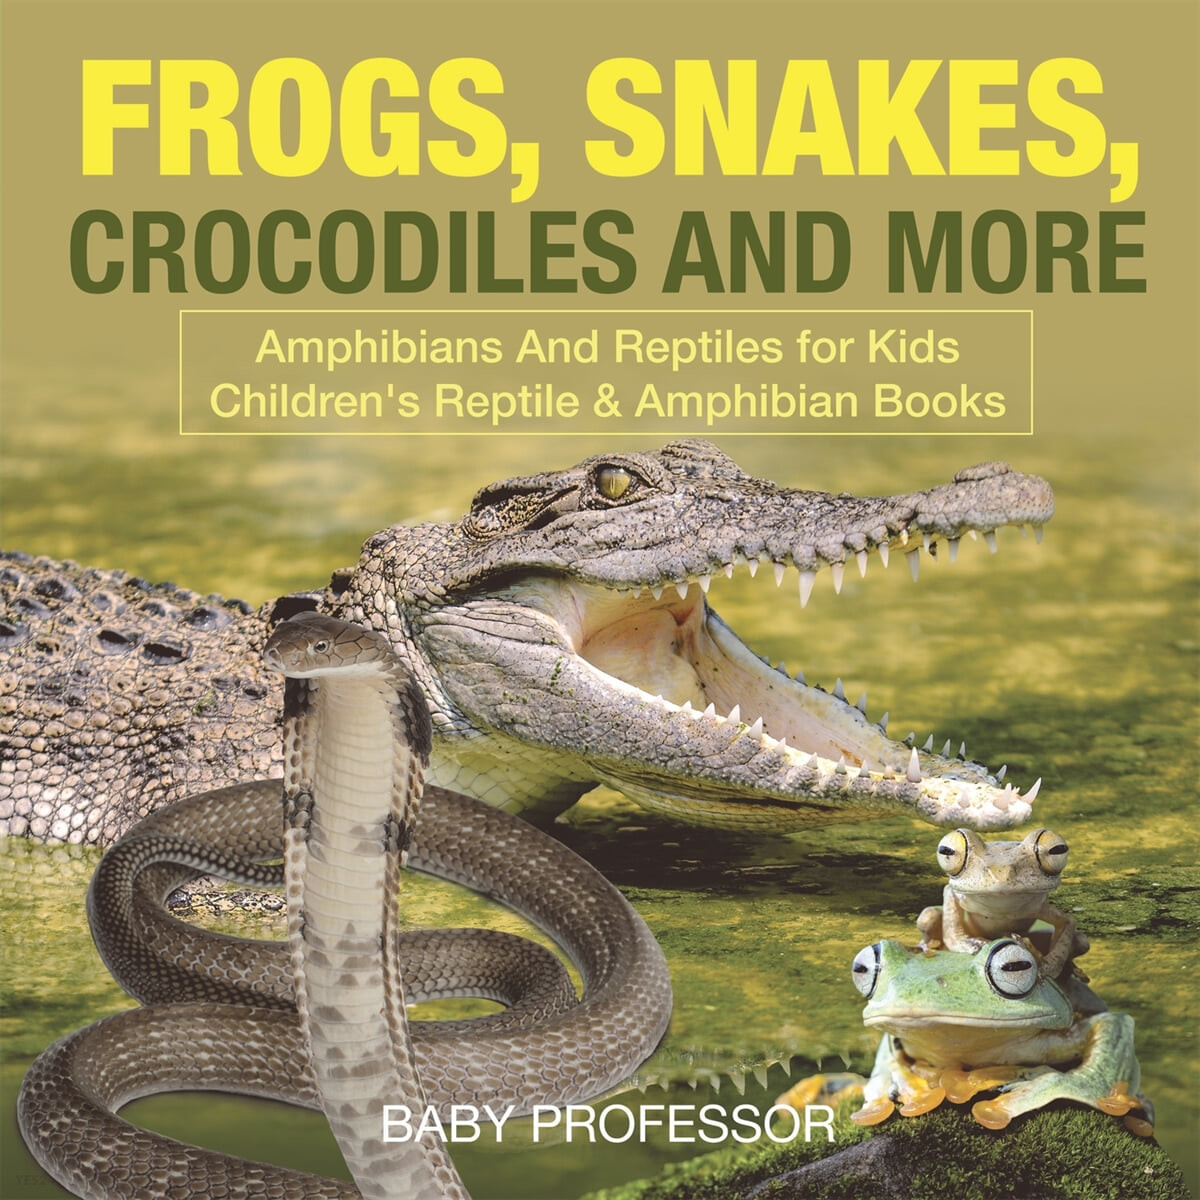 Frogs, Snakes, Crocodiles and More - Amphibians And Reptiles for Kids - Children’s Reptile & Amphibian Books